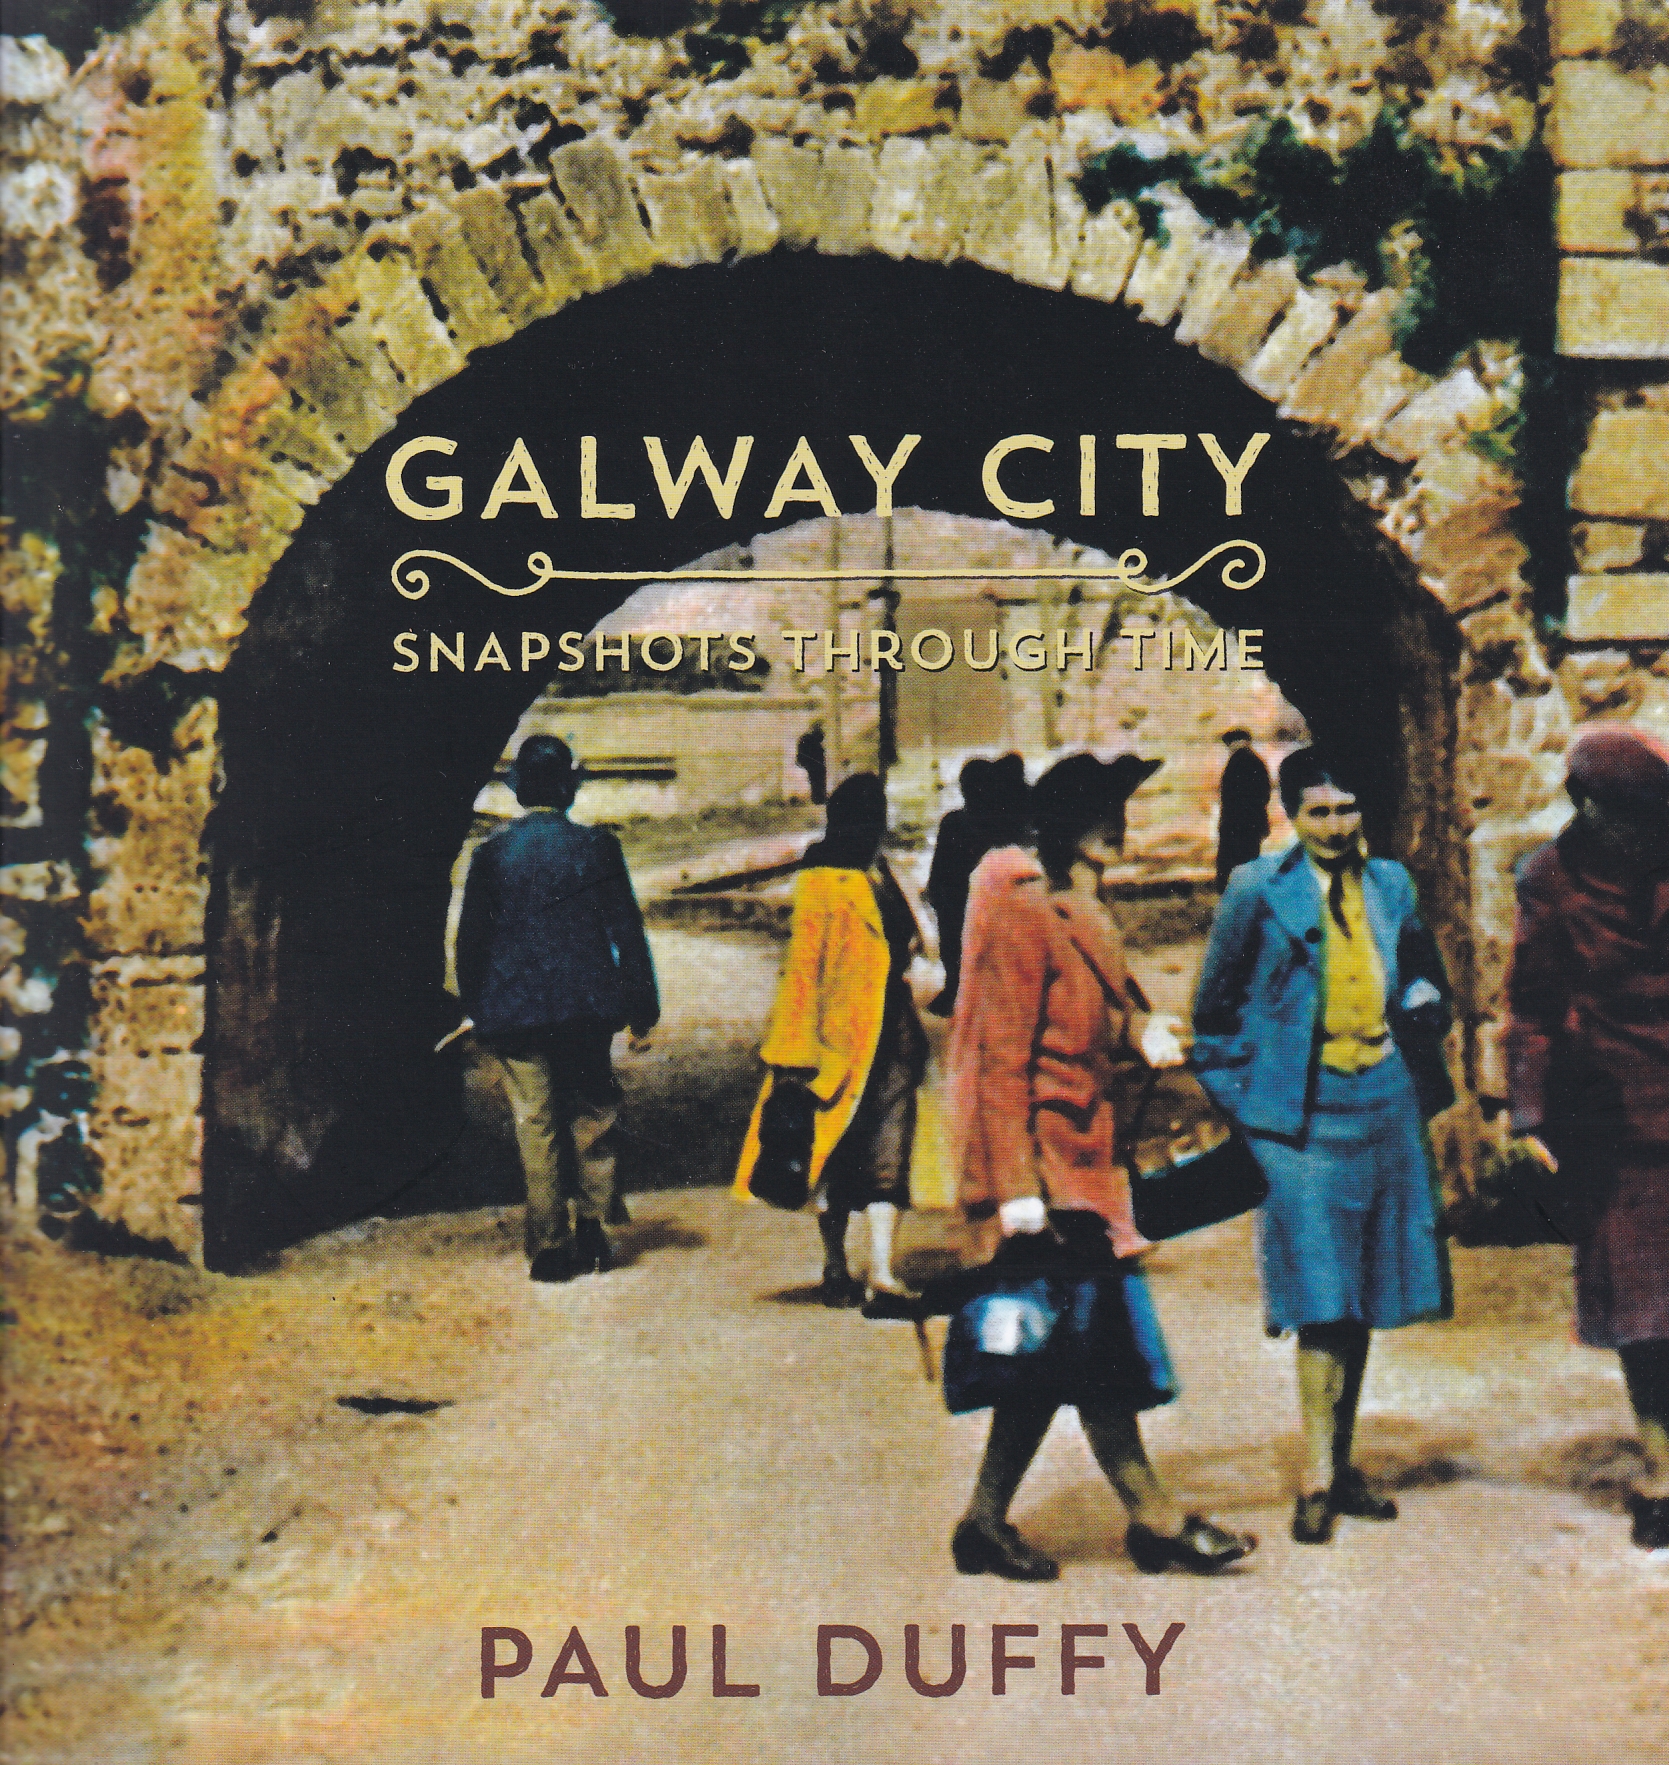 Galway City: Snapshots Through Time | Paul Duffy | Charlie Byrne's